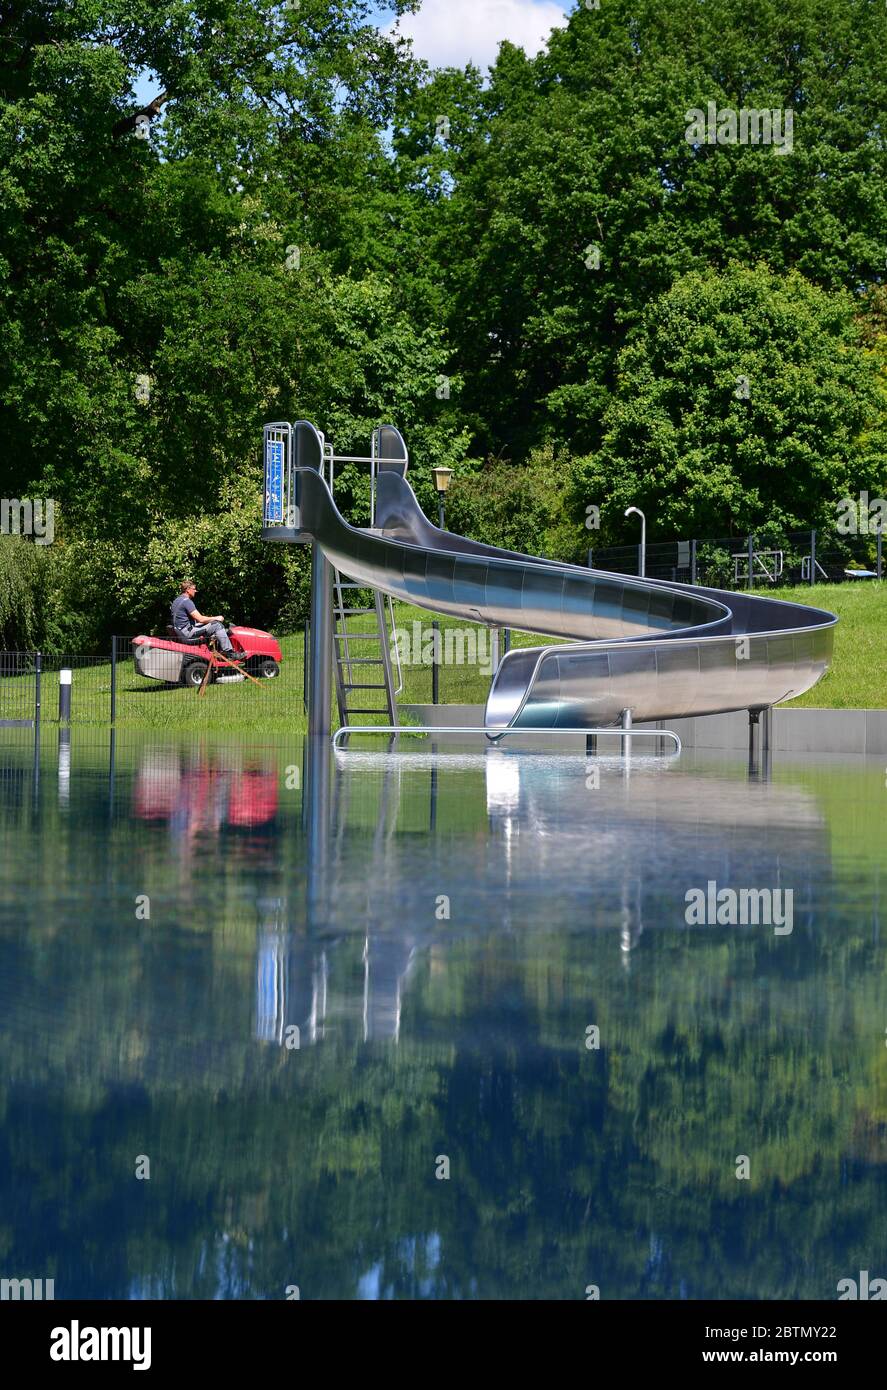 Kleinmachnow, Germany. 27th May, 2020. An employee of the open-air swimming pool Kiebitzberge mows the grass of a sunbathing area behind the non-swimmer pool with a lawnmower. In addition to the sports pool with 50-metre lanes, the pool has a large pool for non-swimmers and an extensive sunbathing area. The planned start of the season on 01.05.2020 had been postponed for the time being due to the regulation to contain the Corona pandemic. Credit: Soeren Stache/dpa-Zentralbild/ZB/dpa/Alamy Live News Stock Photo